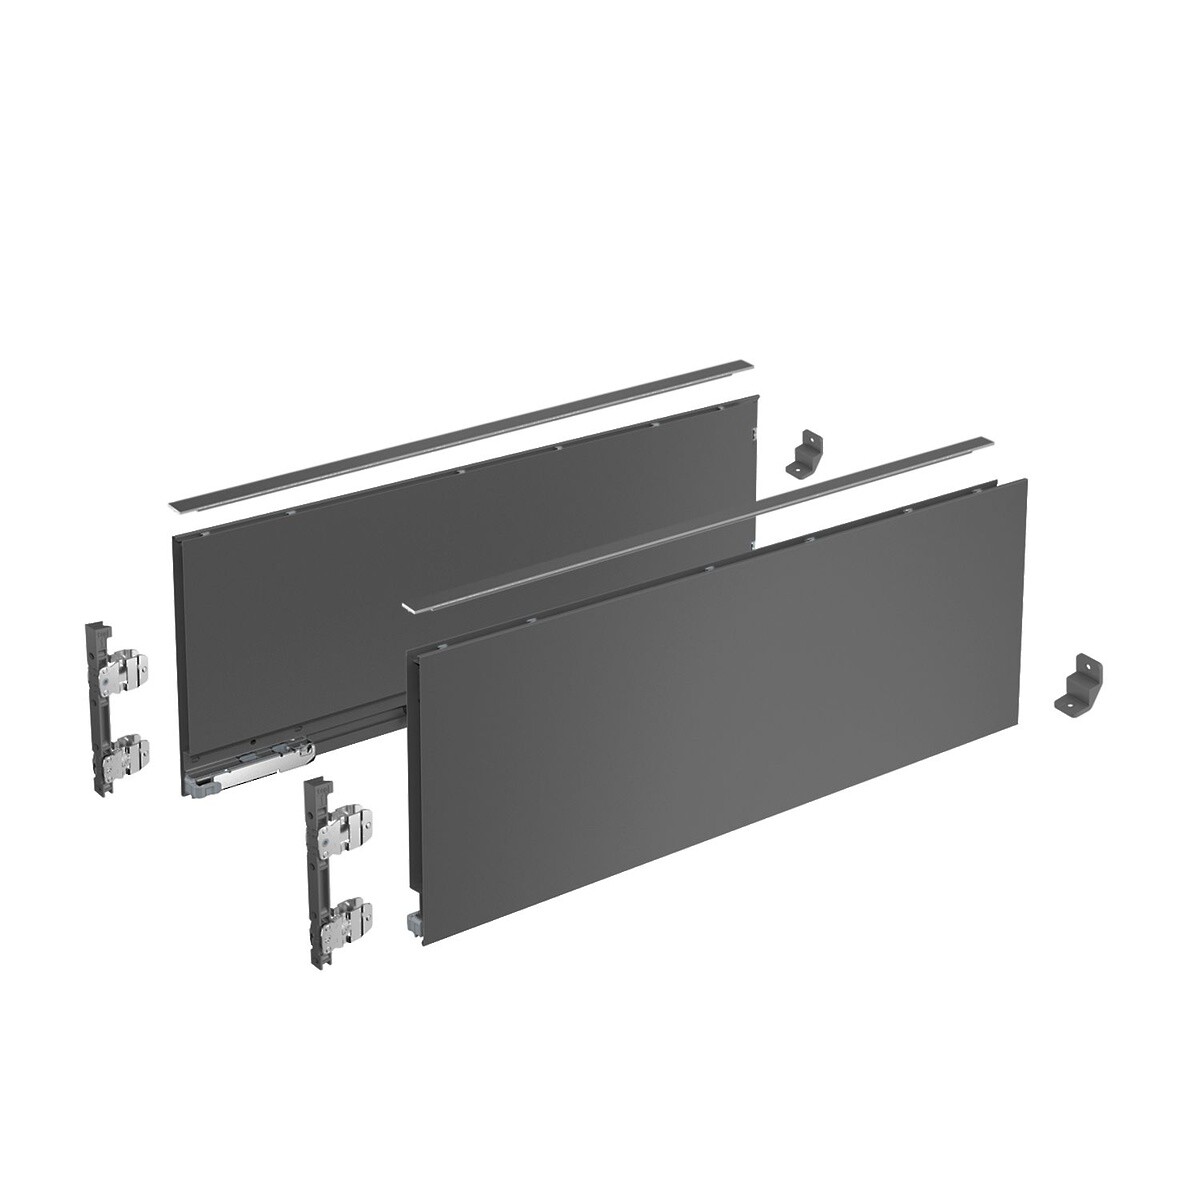 AvanTech YOU Drawer side profile set, height 187 mm x NL 270 mm, Anthracite, Left and Right